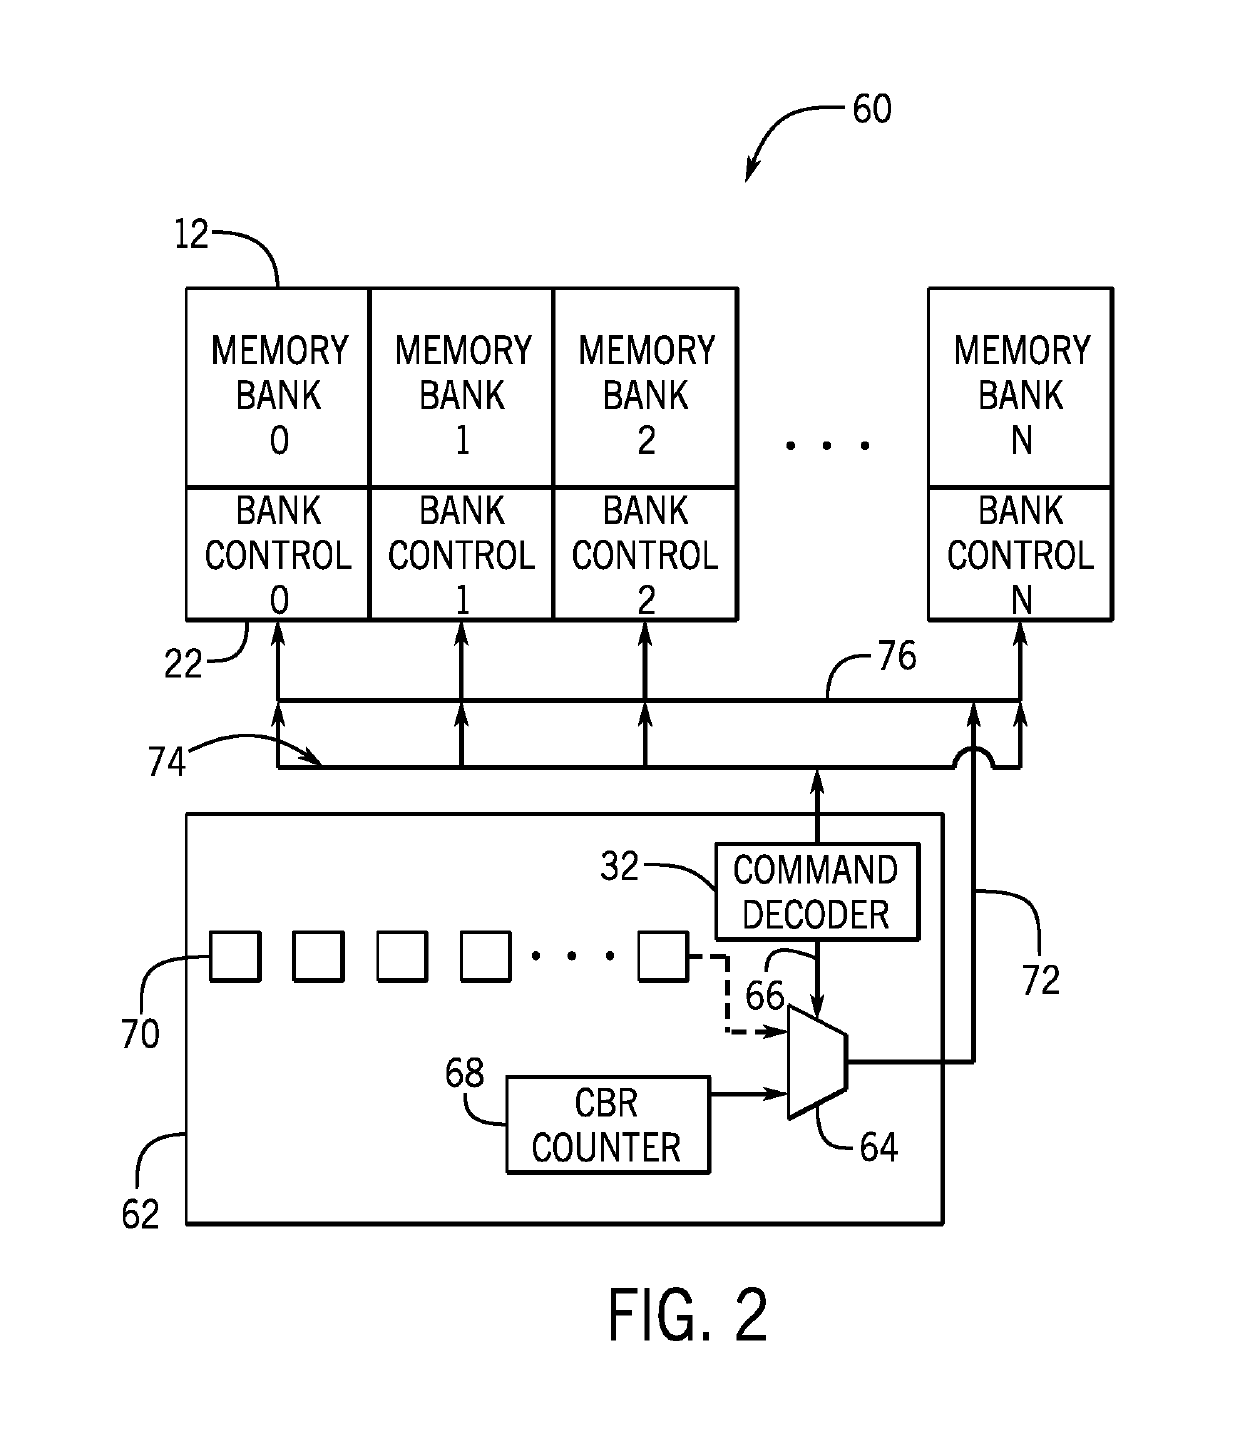 Systems and methods for performing row hammer refresh operations in redundant memory